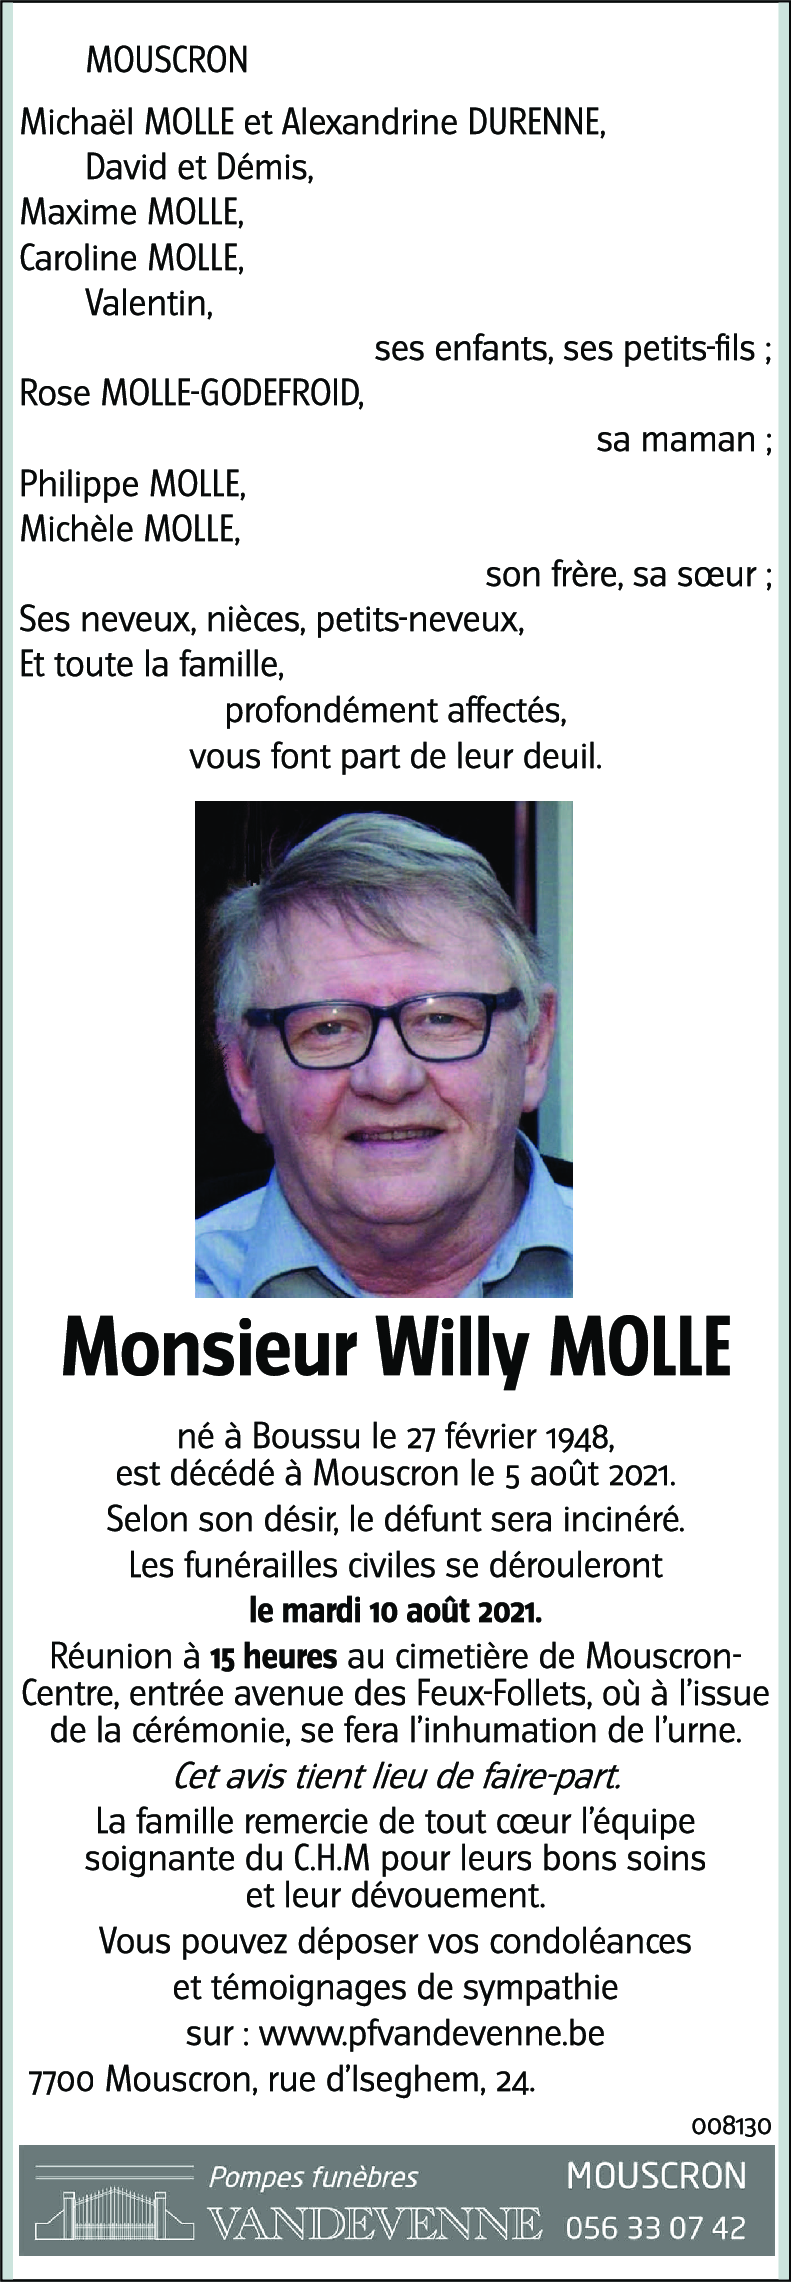 Willy MOLLE